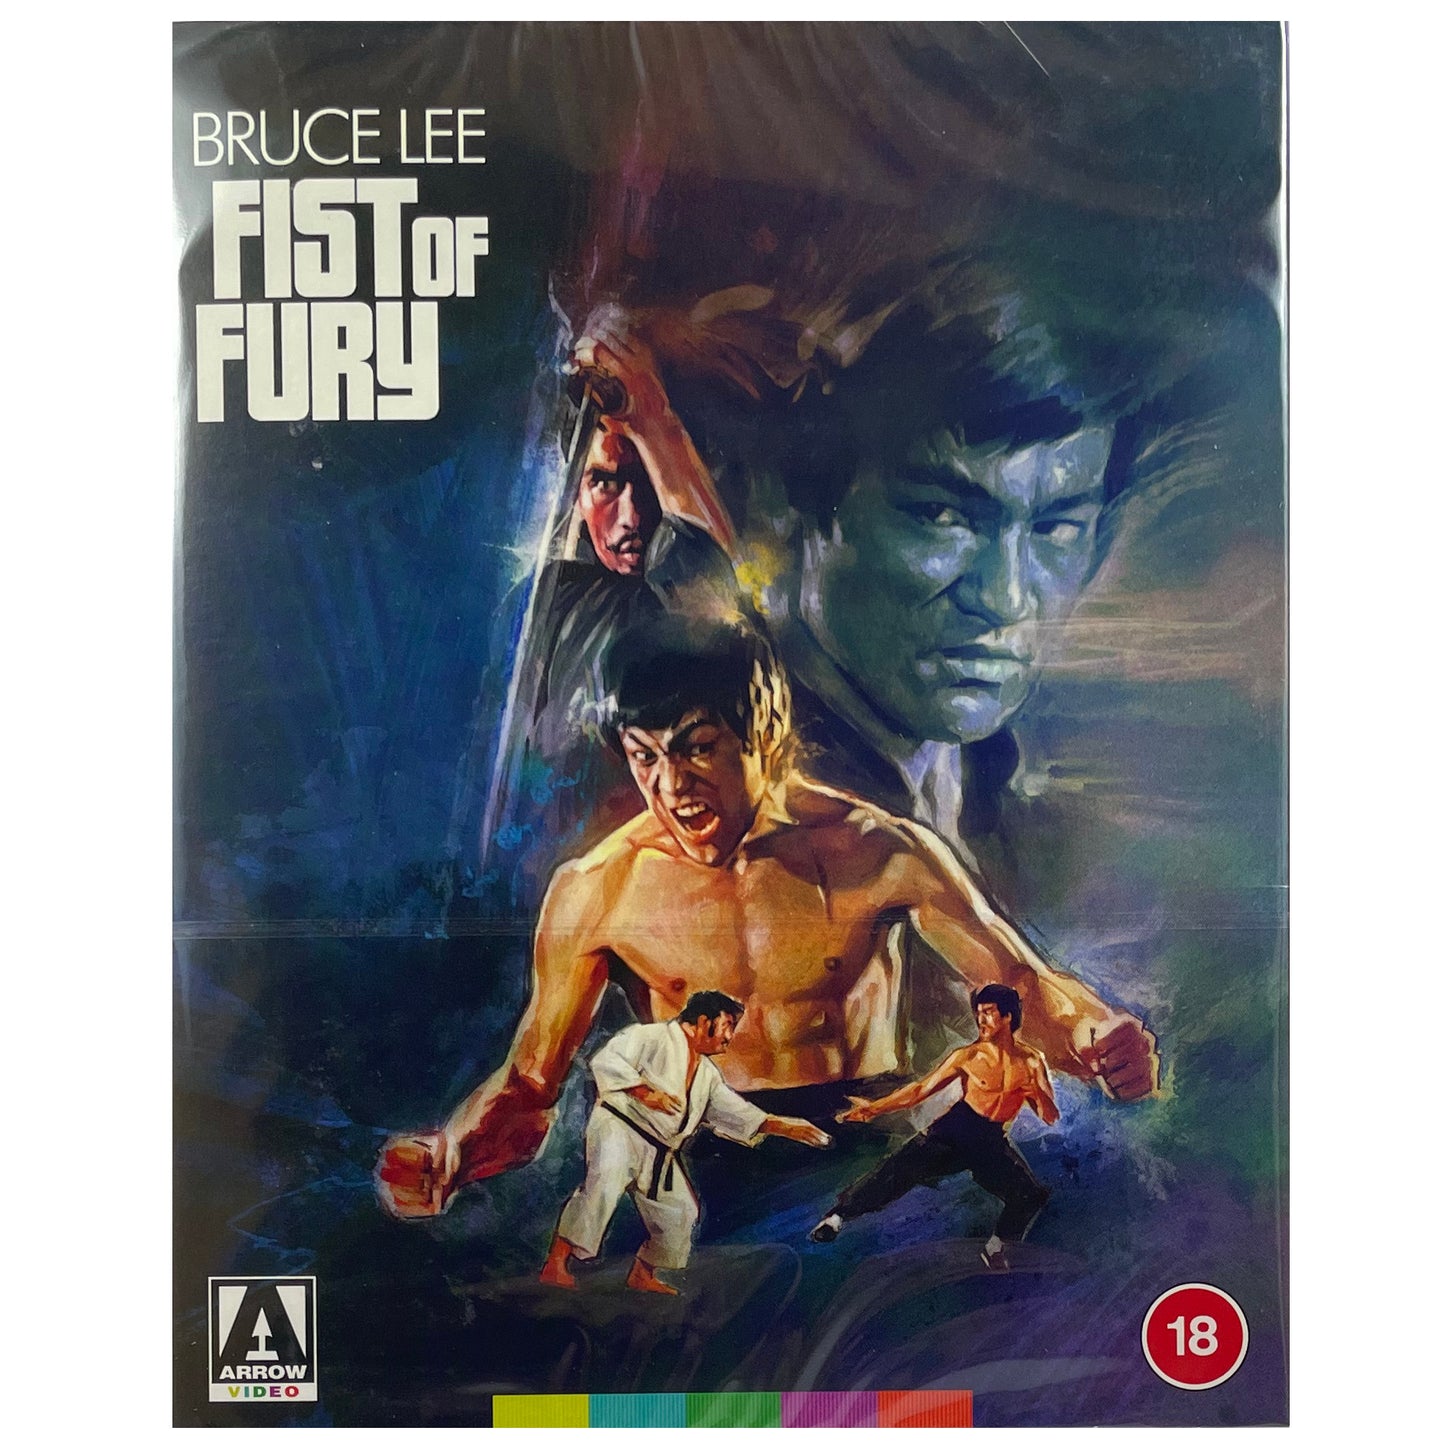 Fist of Fury Blu-Ray - Limited Edition